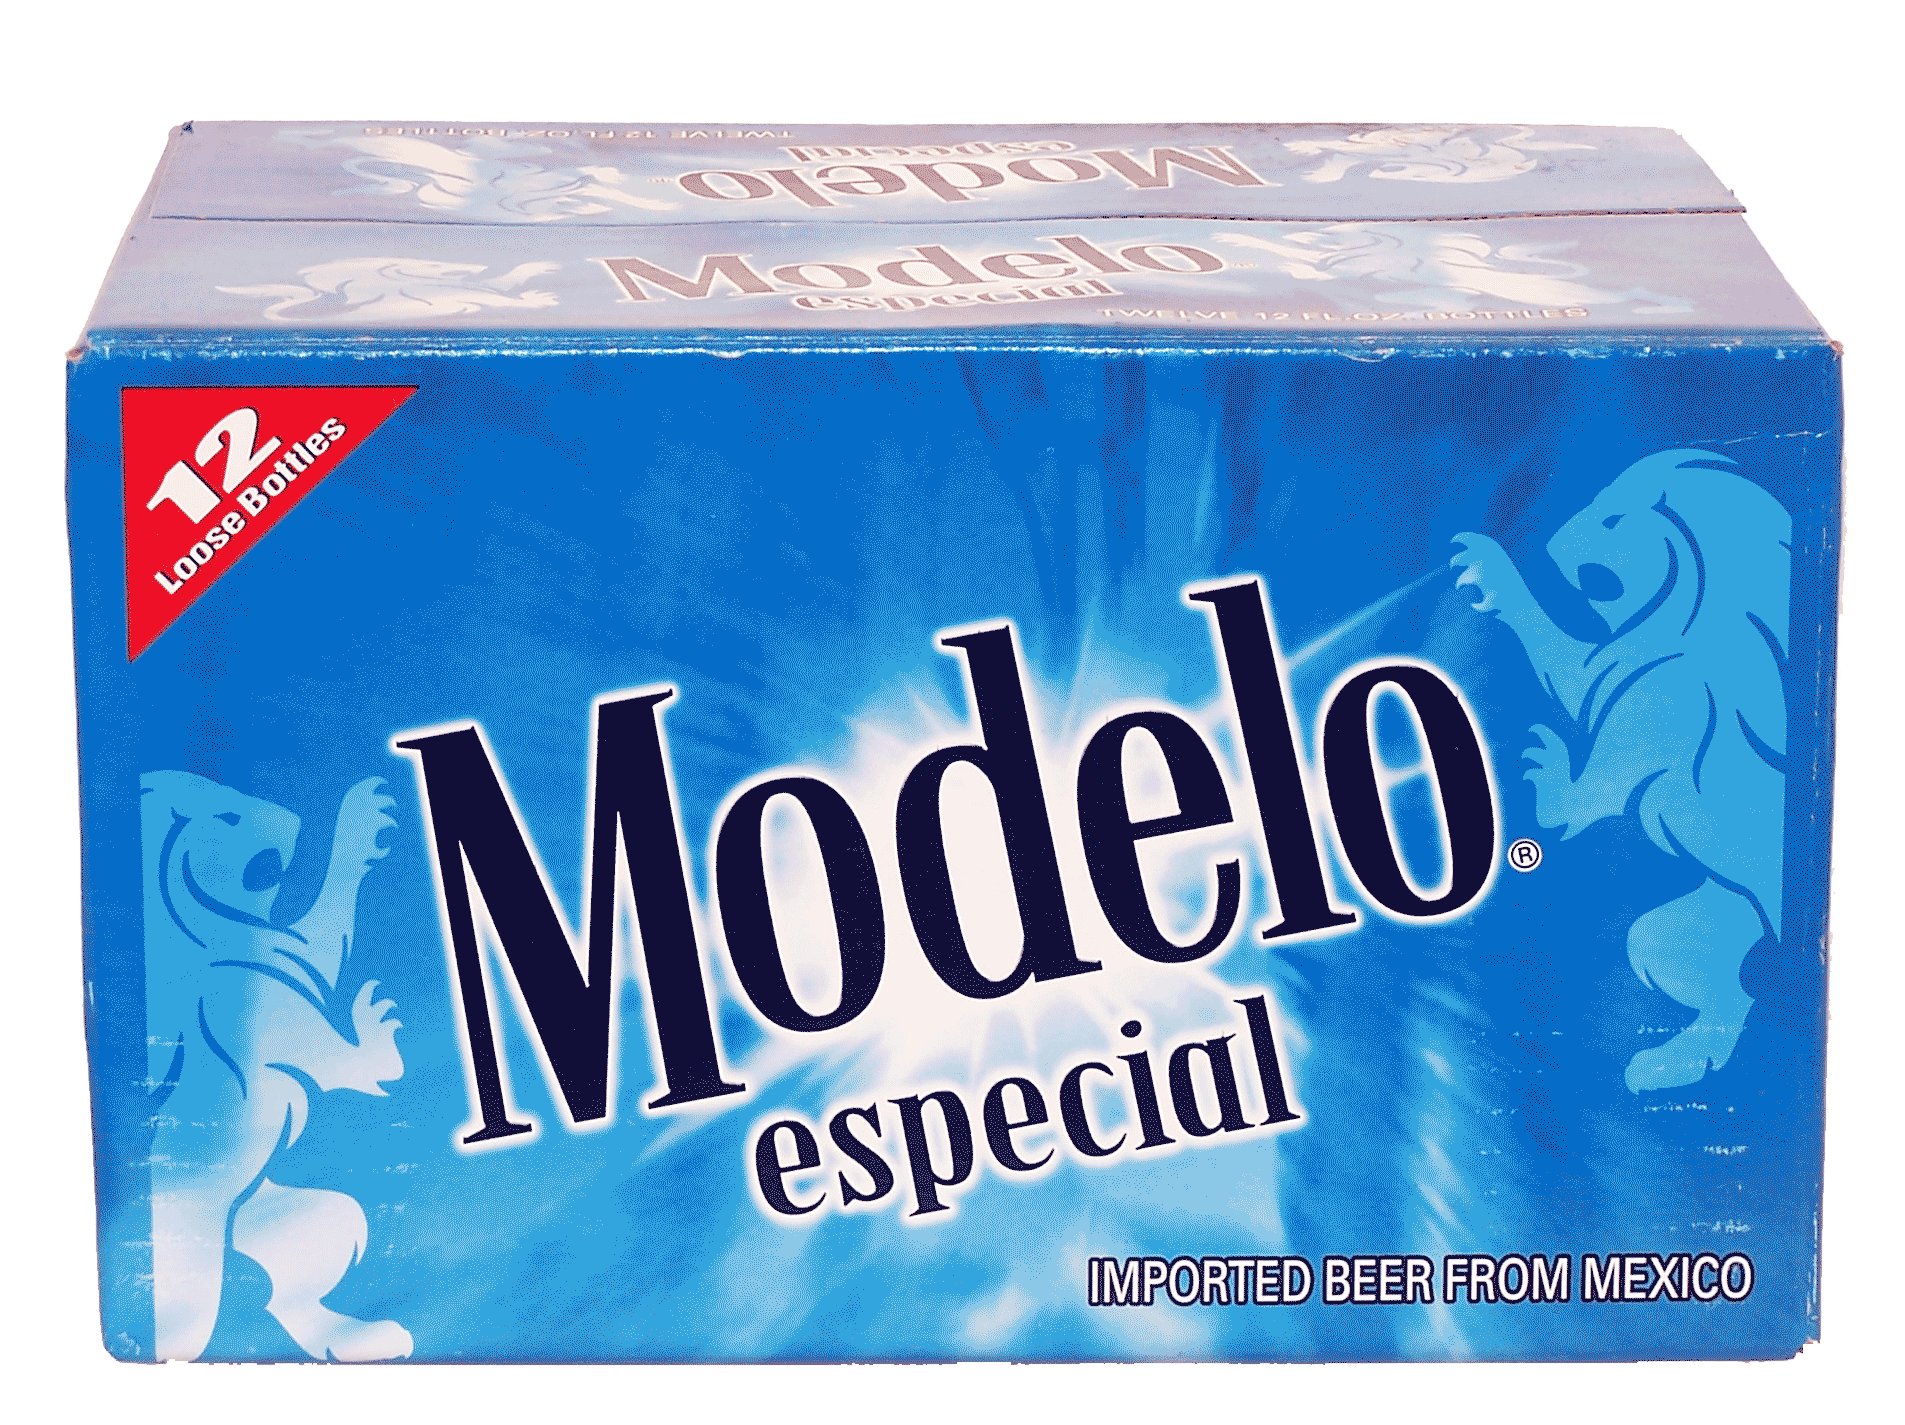 Modelo Especial  imported beer from mexico, 12 12-fl. oz. glass bottles Full-Size Picture